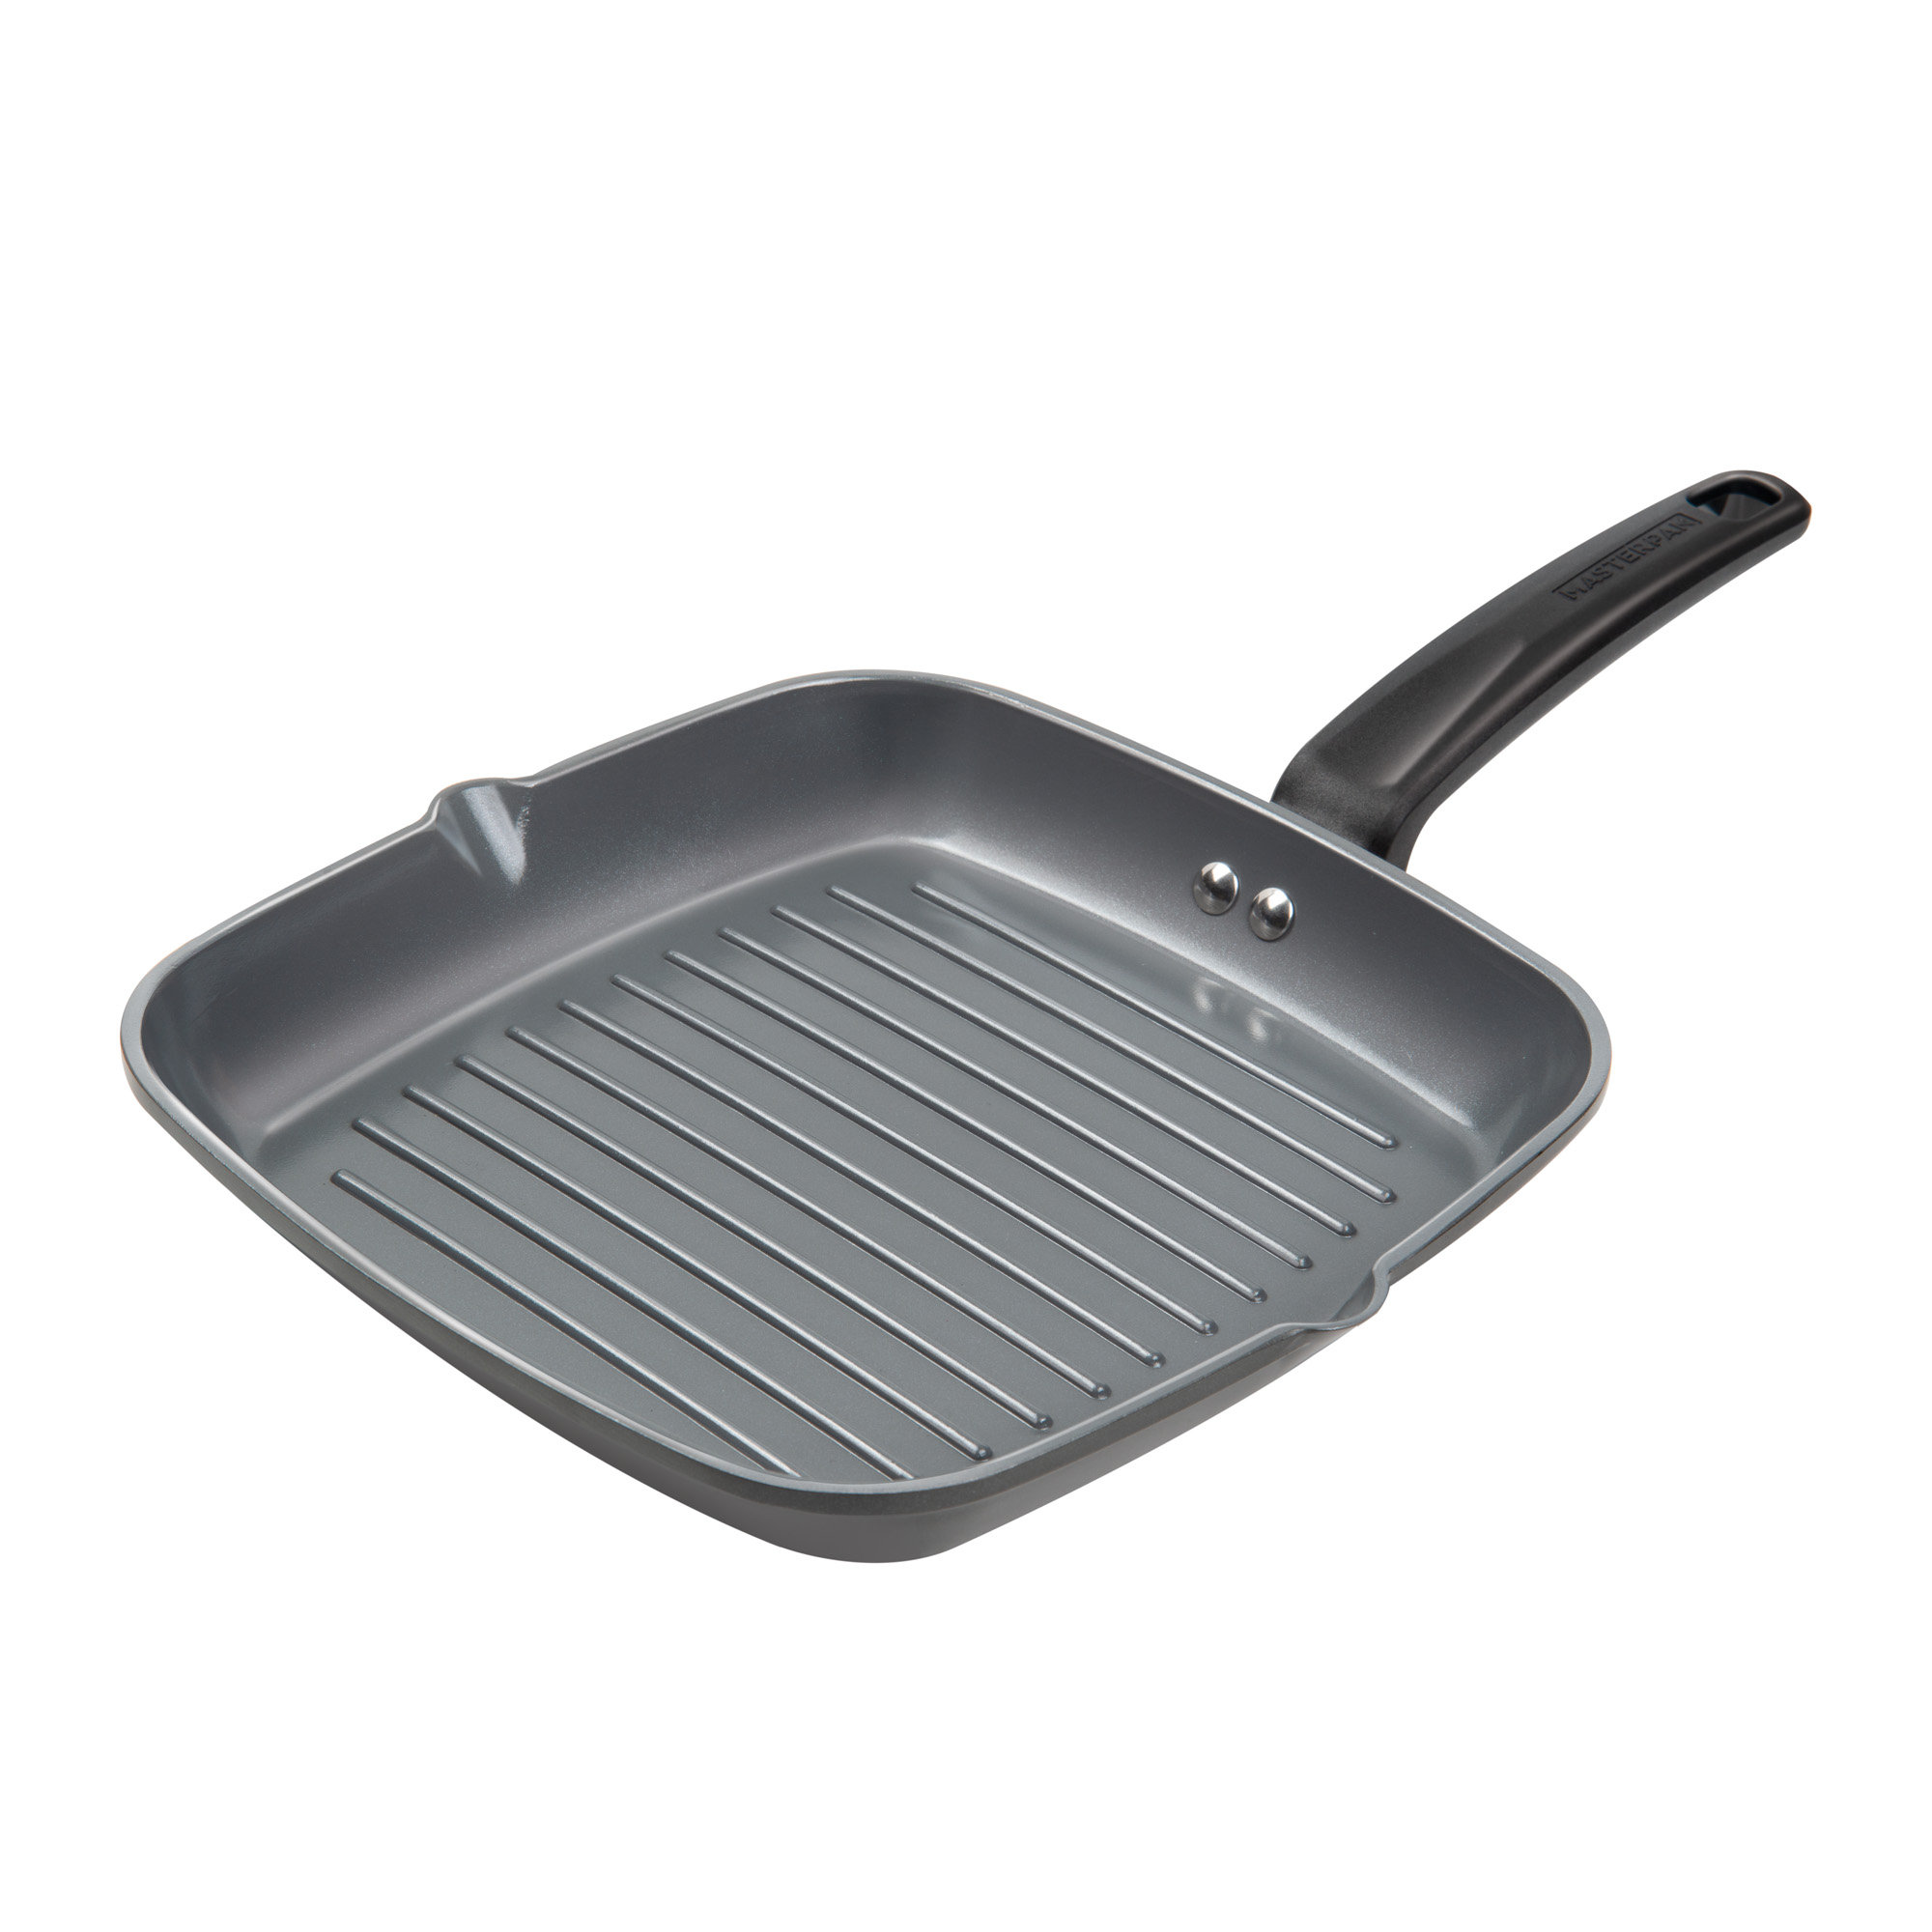  MasterPan Non-Stick 3 Section Meal Skillet, 11, Black